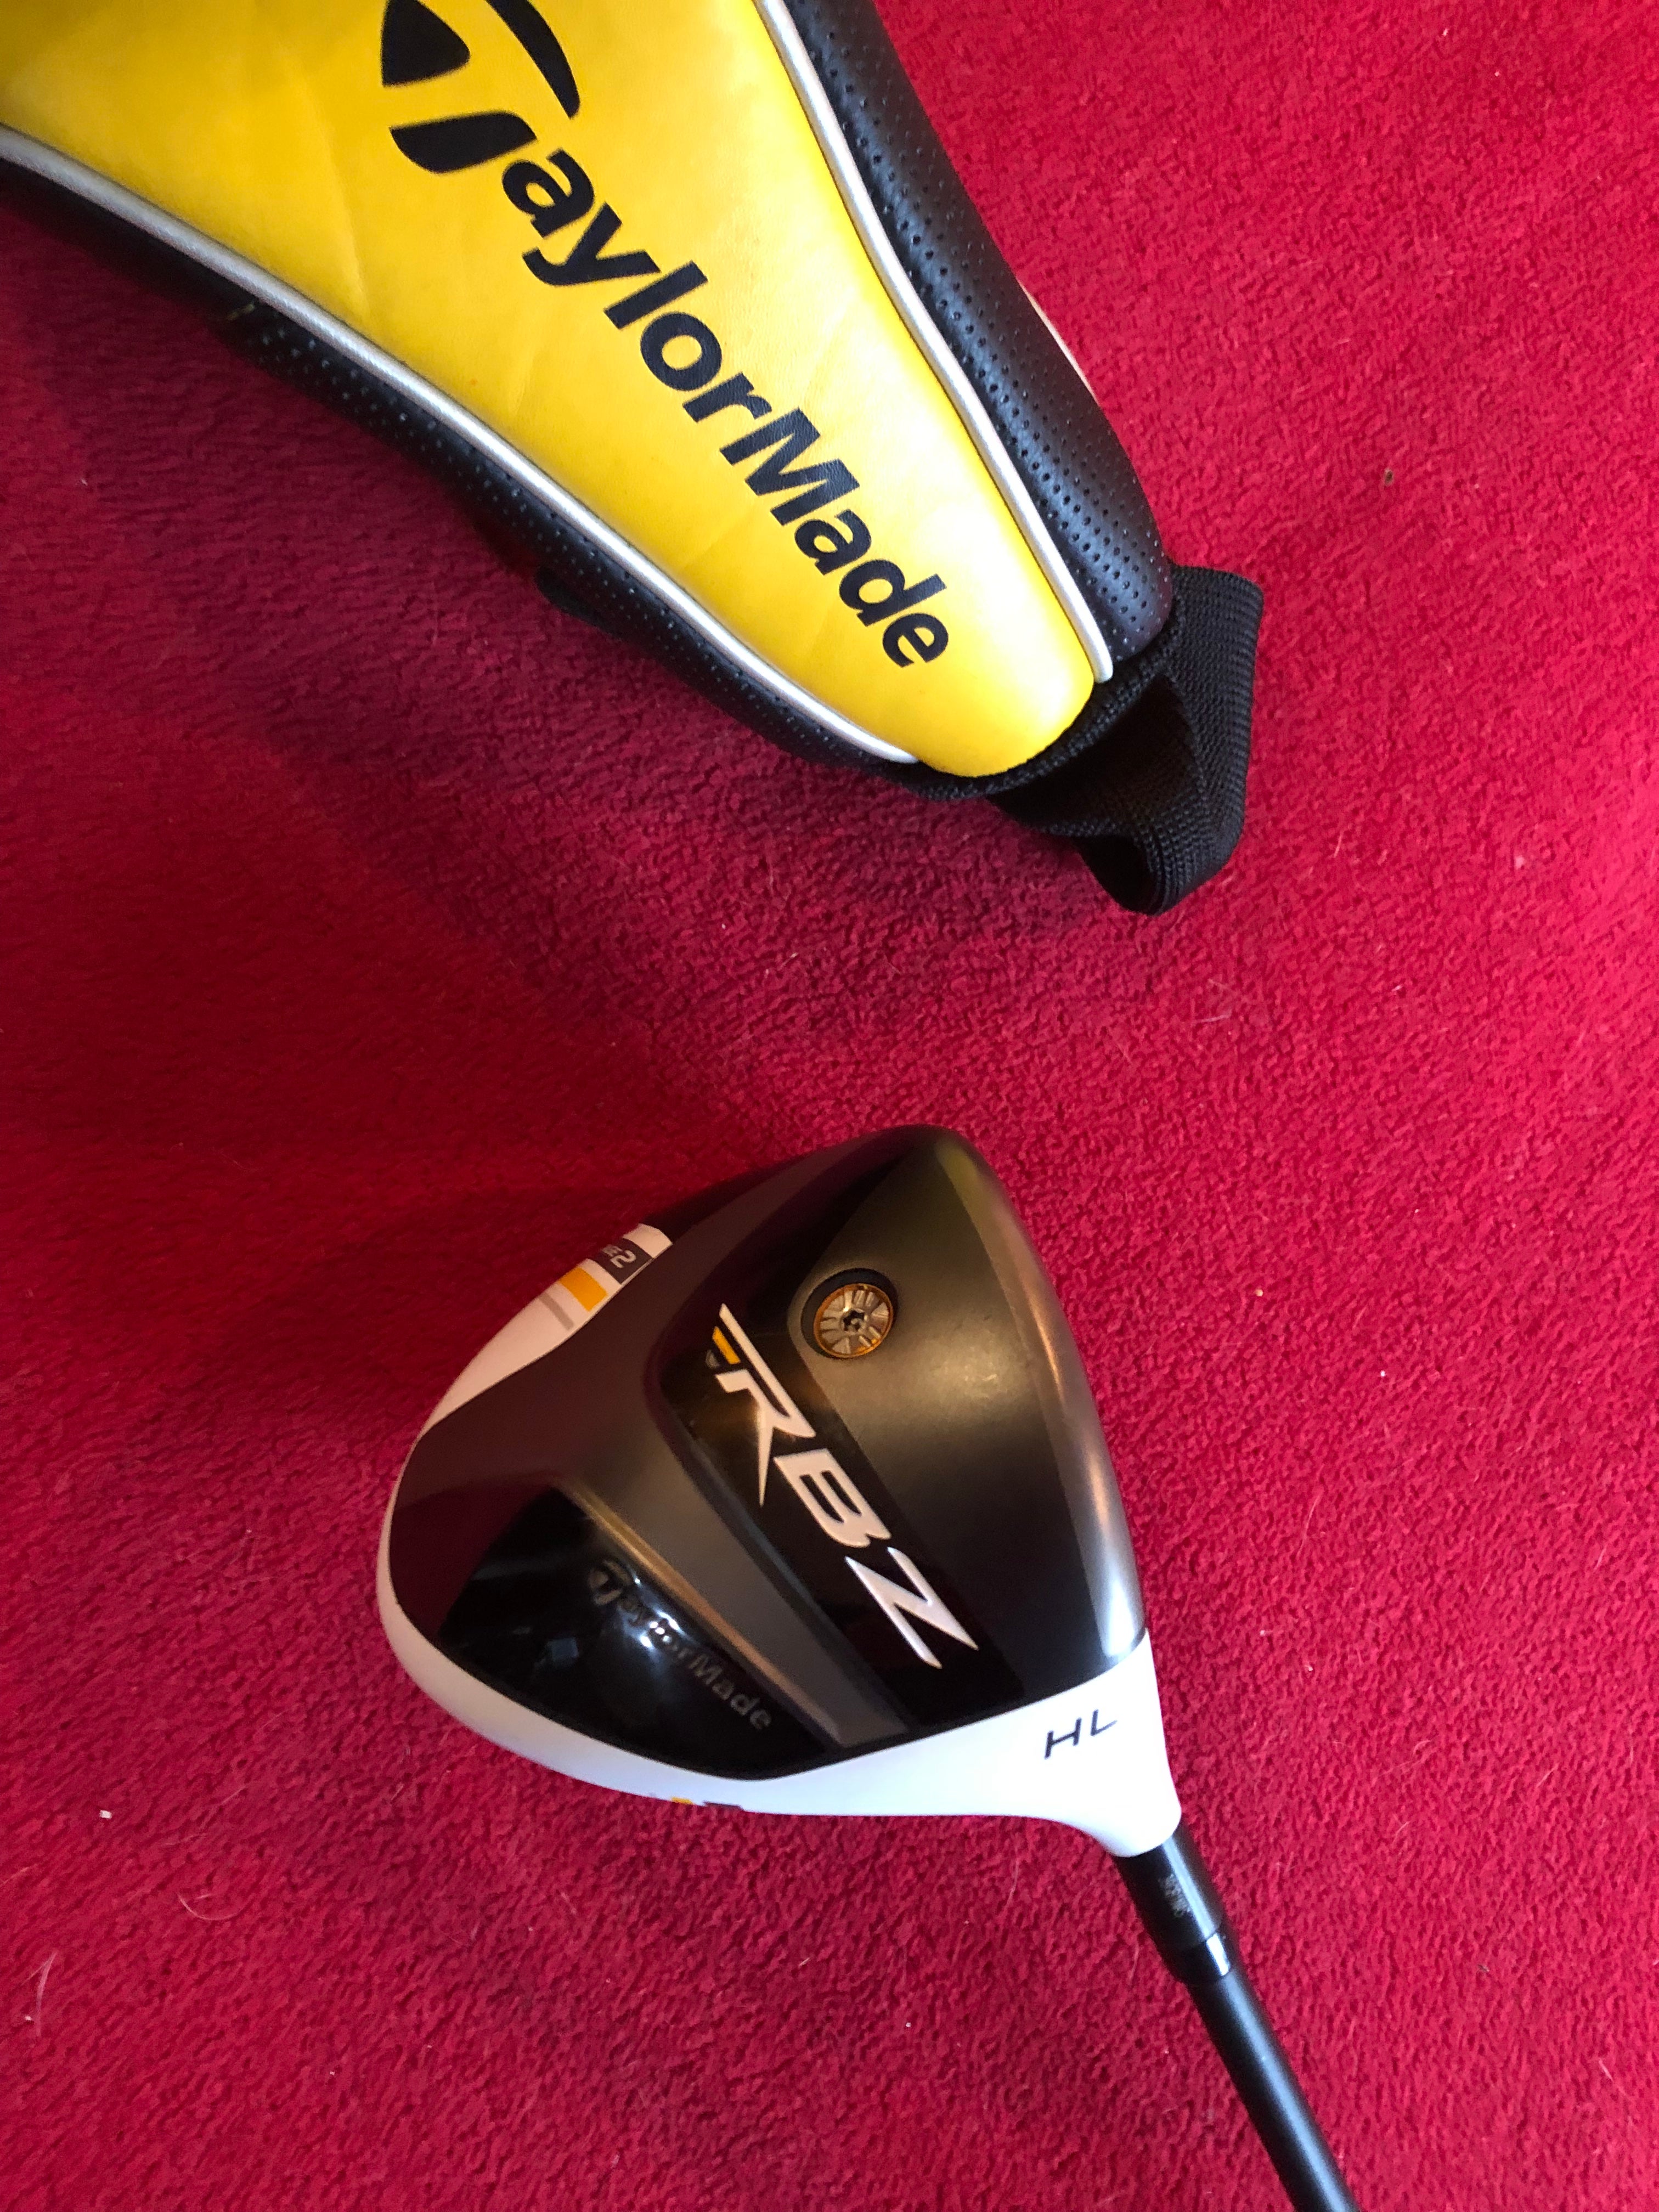 used taylormade rocketballz driver